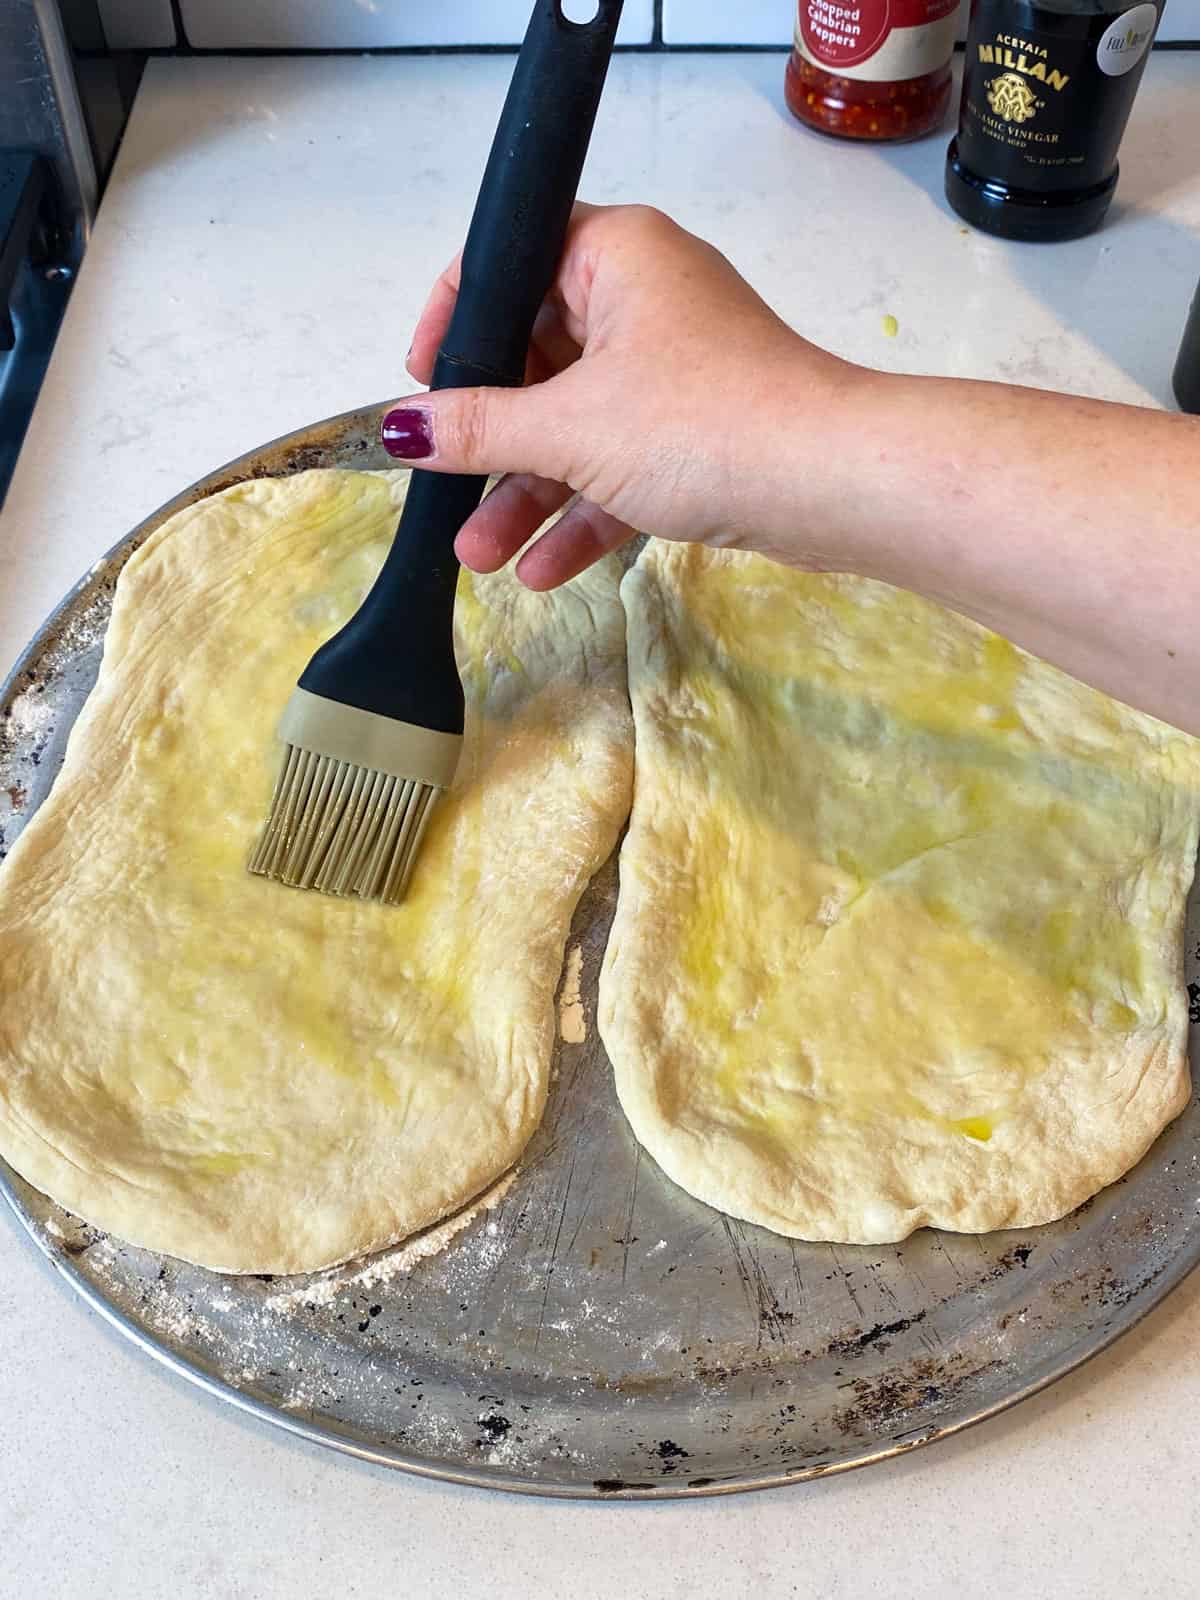 Brush the pizza dough with olive oil. This will prevent the dough from sticking when it's folded over.